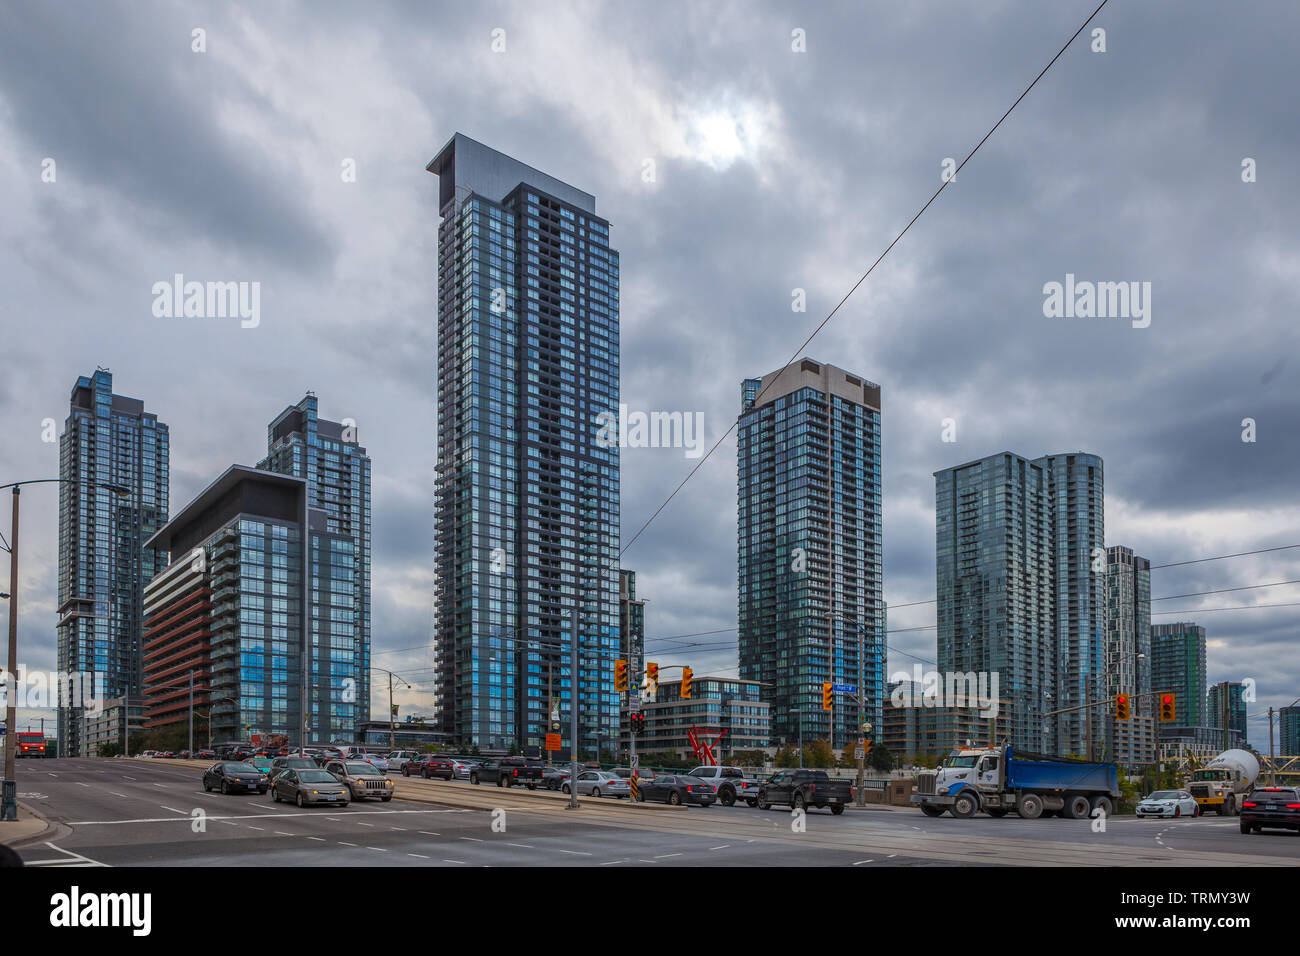 Toronto, CANADA - November 10th, 2018: Busy construction of new buildings and skyscrapers in Toronto centre, Canada Stock Photo